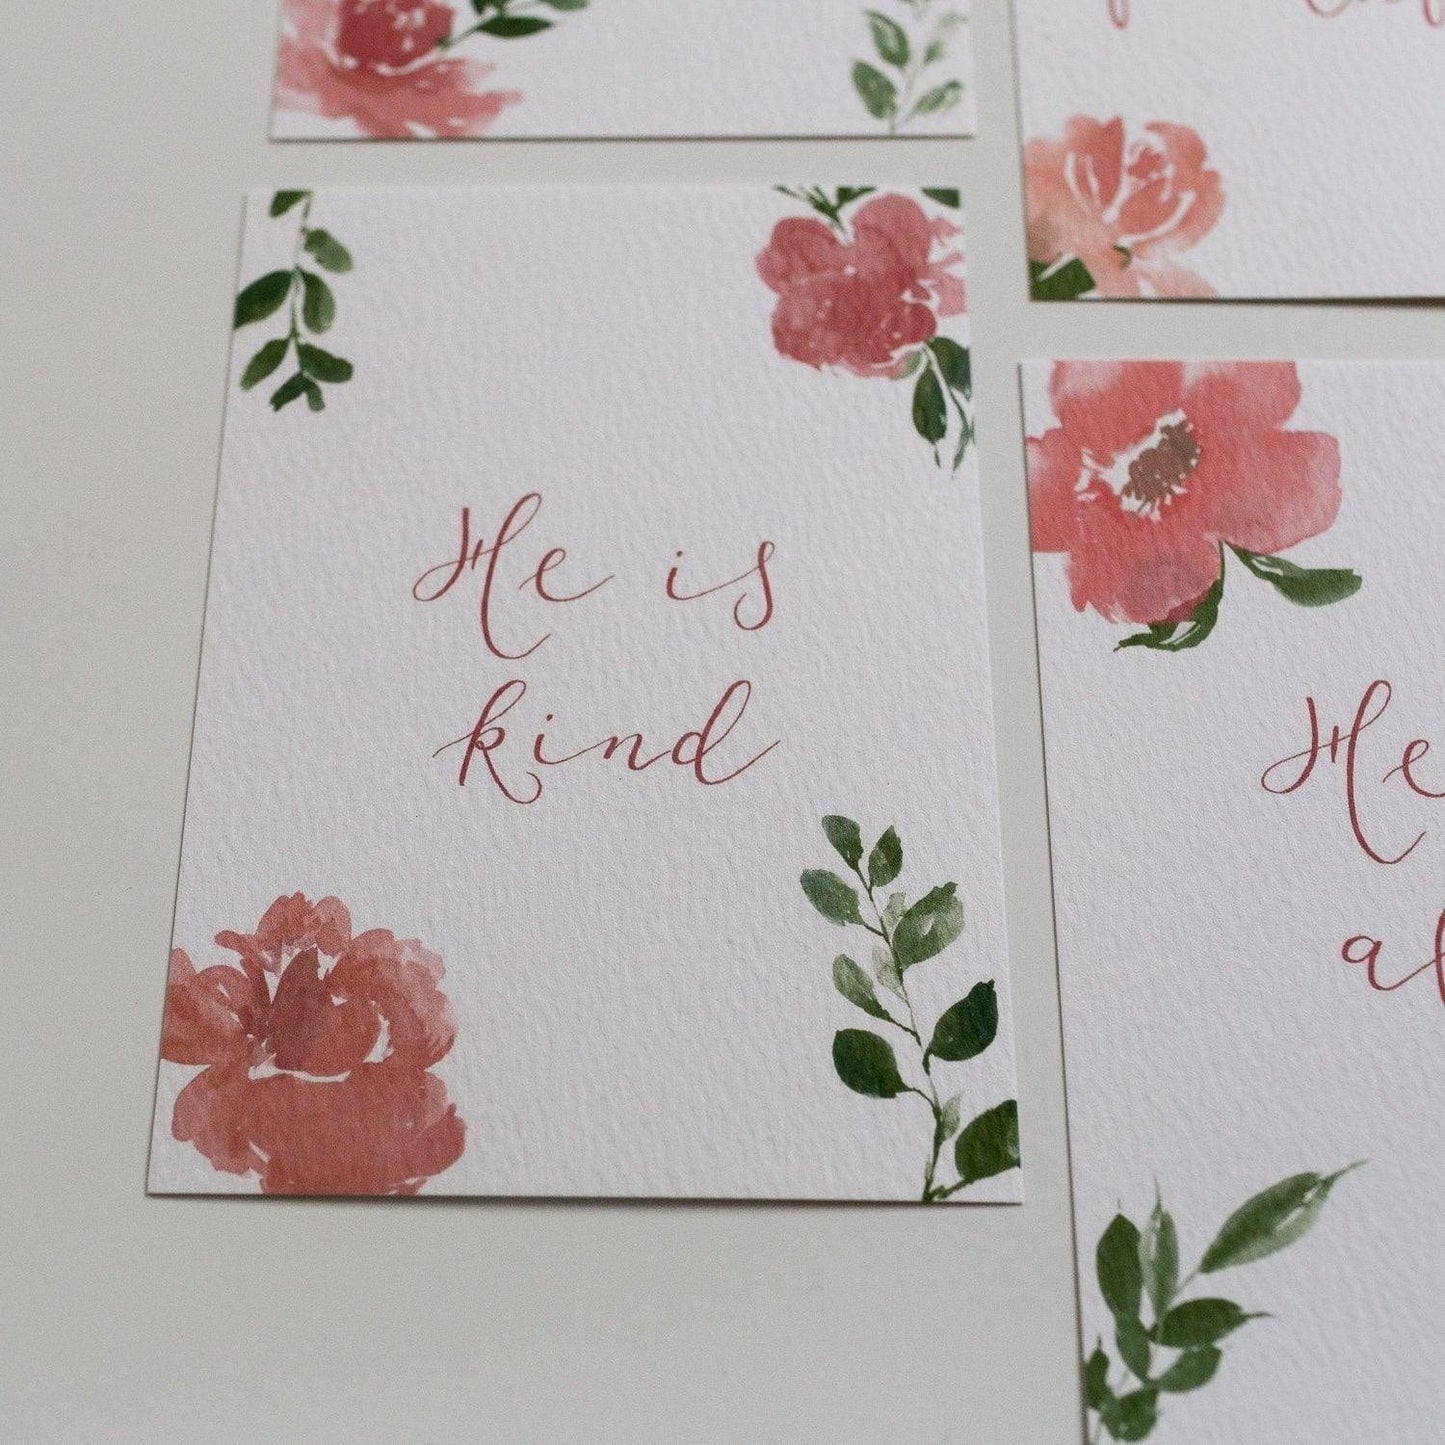 Set of 6 “This I know” postcards Cards And Hope Designs   